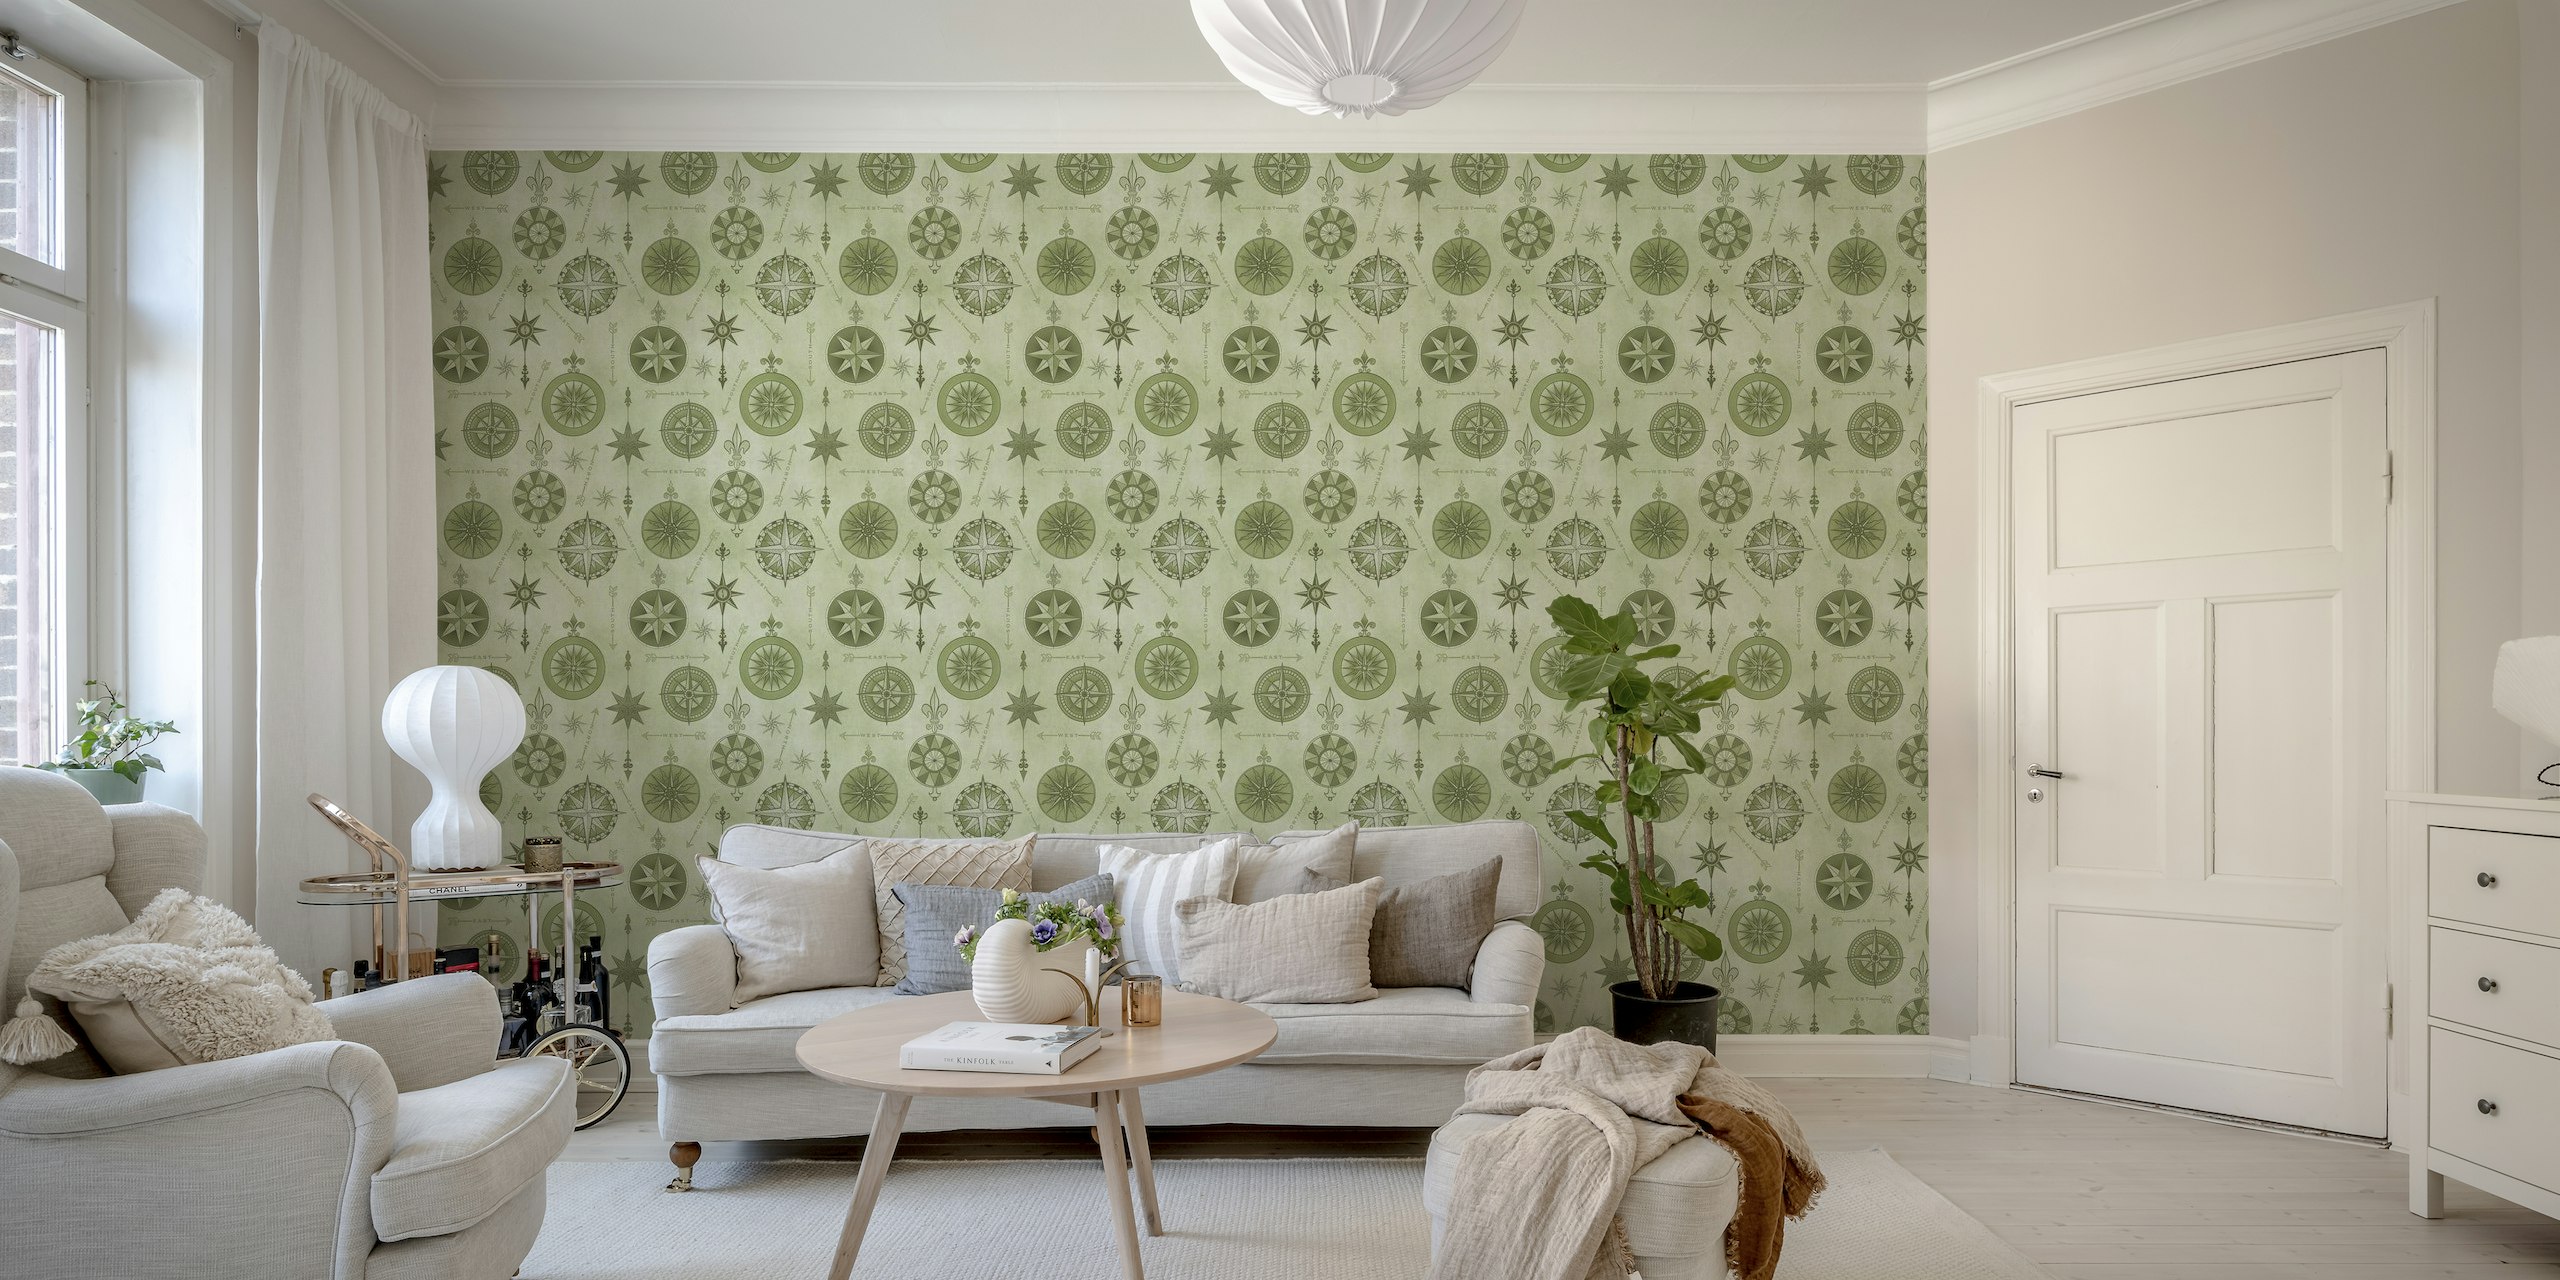 Vintage compass pattern wall mural on a green background